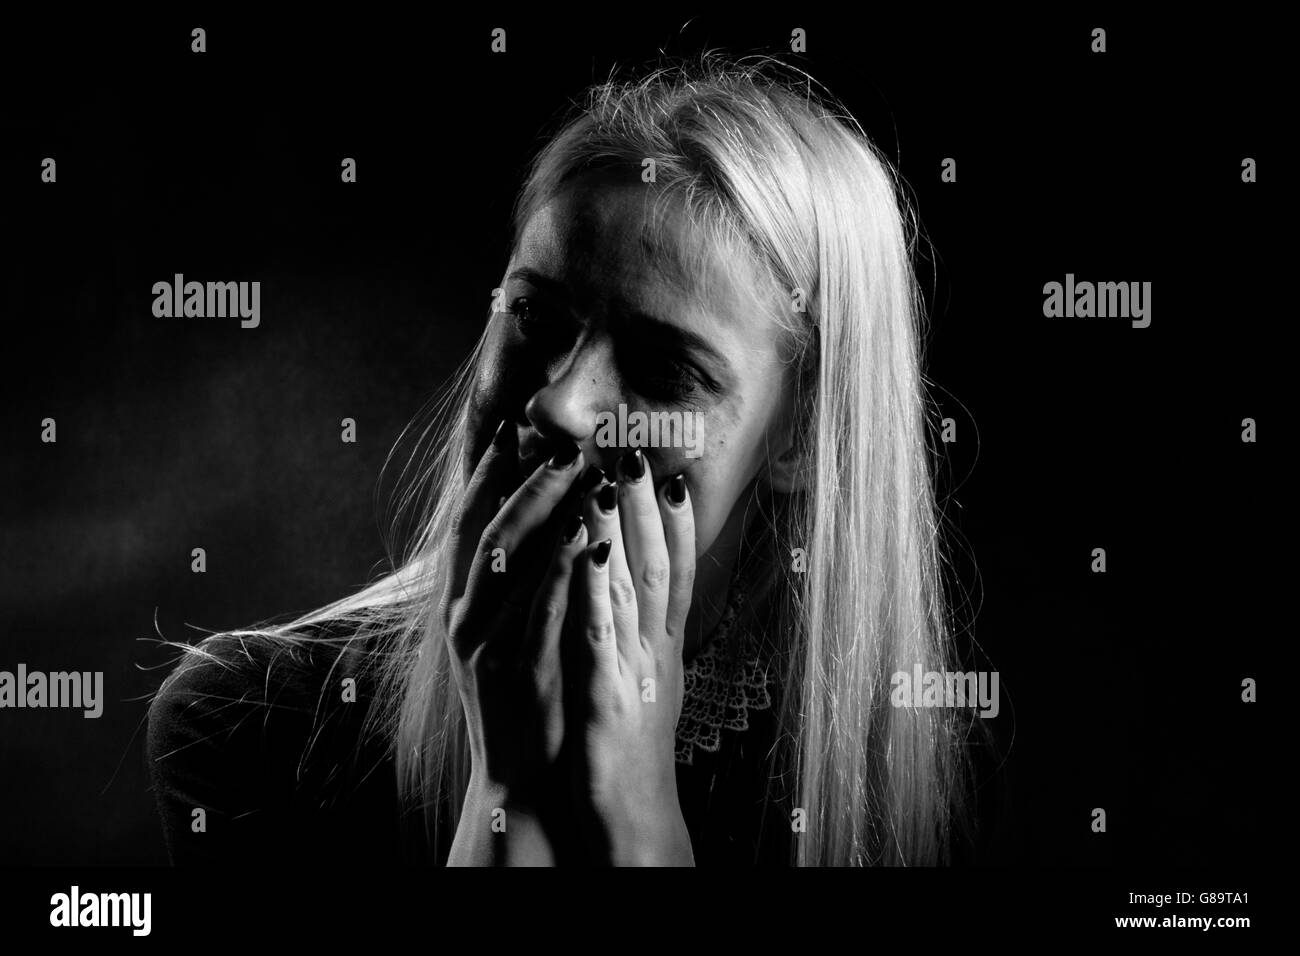 woman with smeared cosmetics crying on black background, monochrome Stock Photo